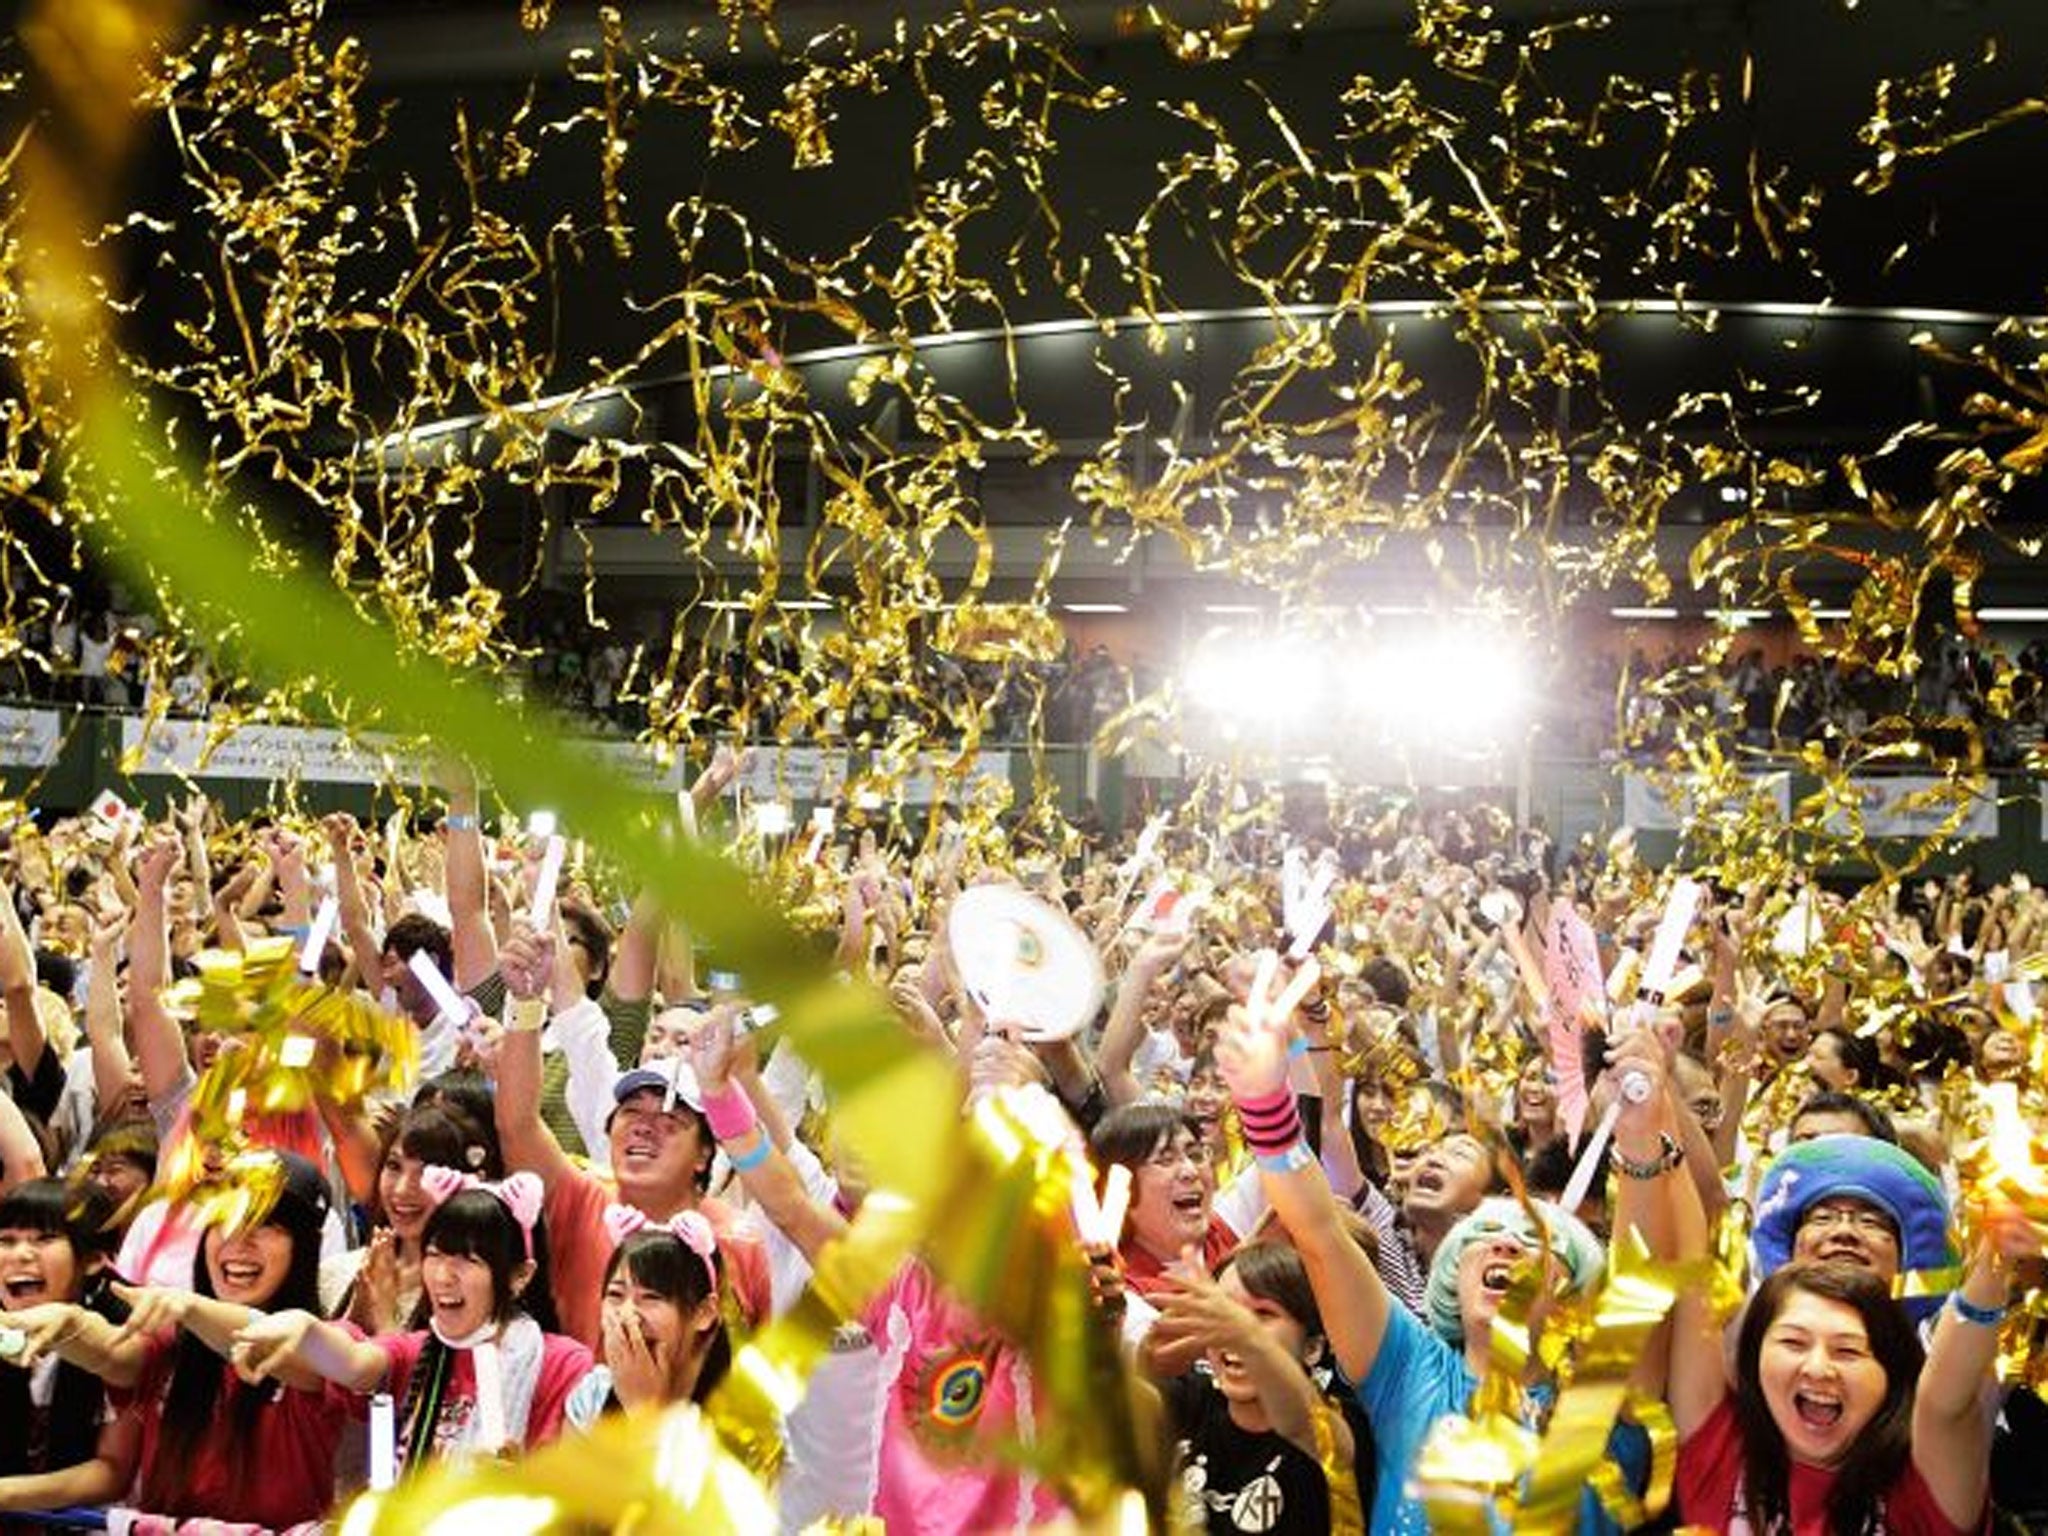 Residents of Olympic bid city Tokyo celebrate after the announcement of the 2020 Summer Olympic